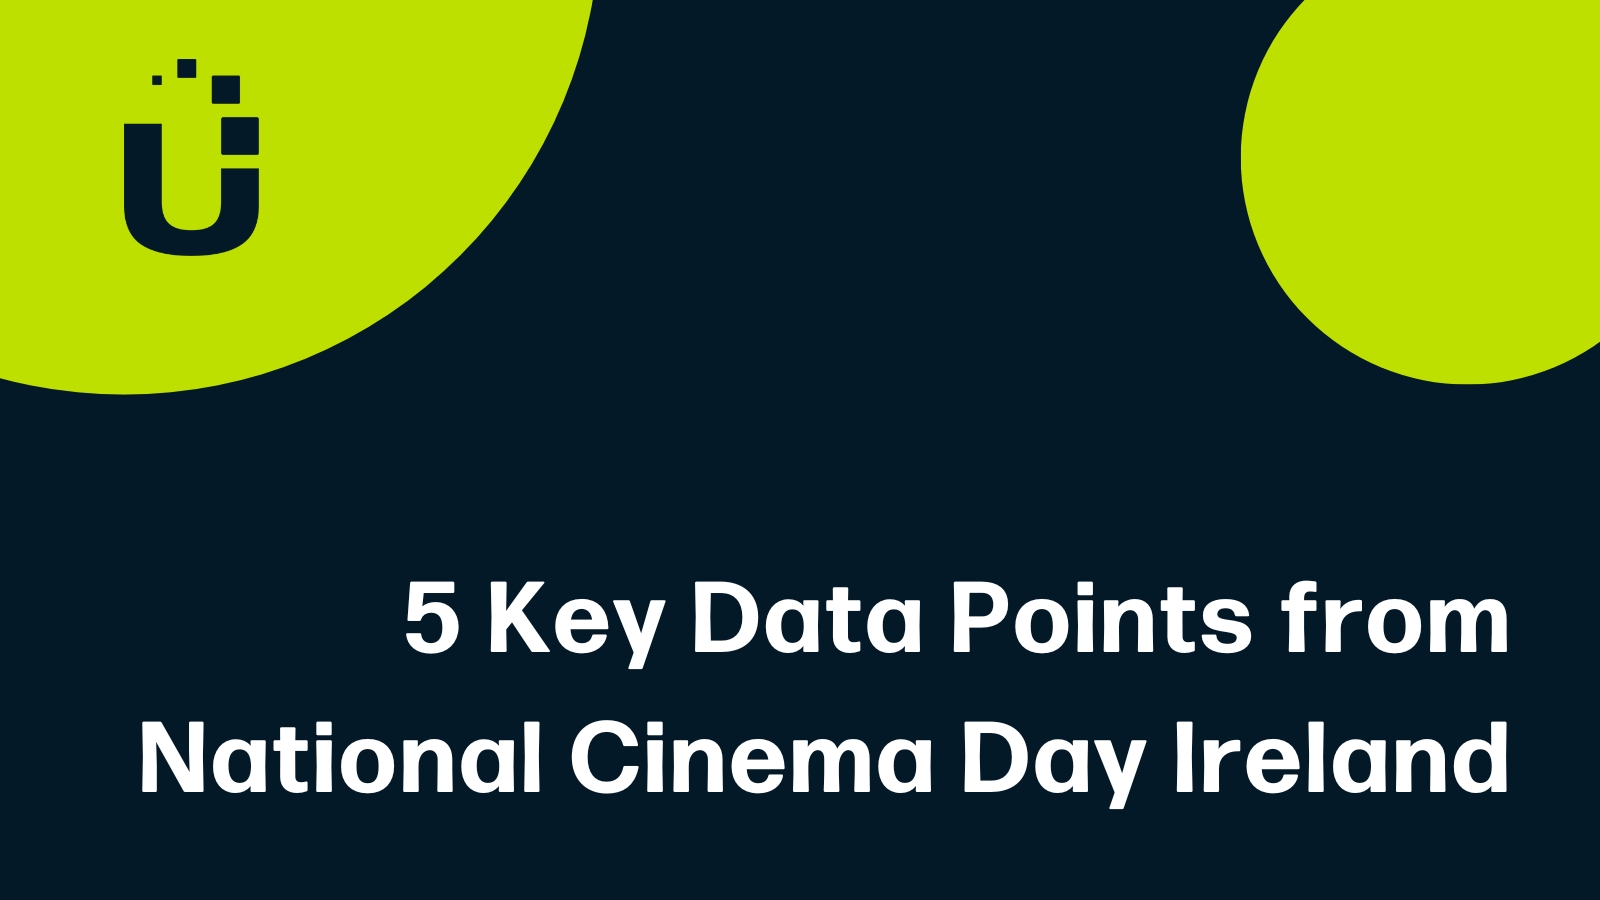 Black background. One green circle in the top right, one green circle in the top left with the usheru logo. The words "4 key data points from National Cinema Day US" are at the bottom.